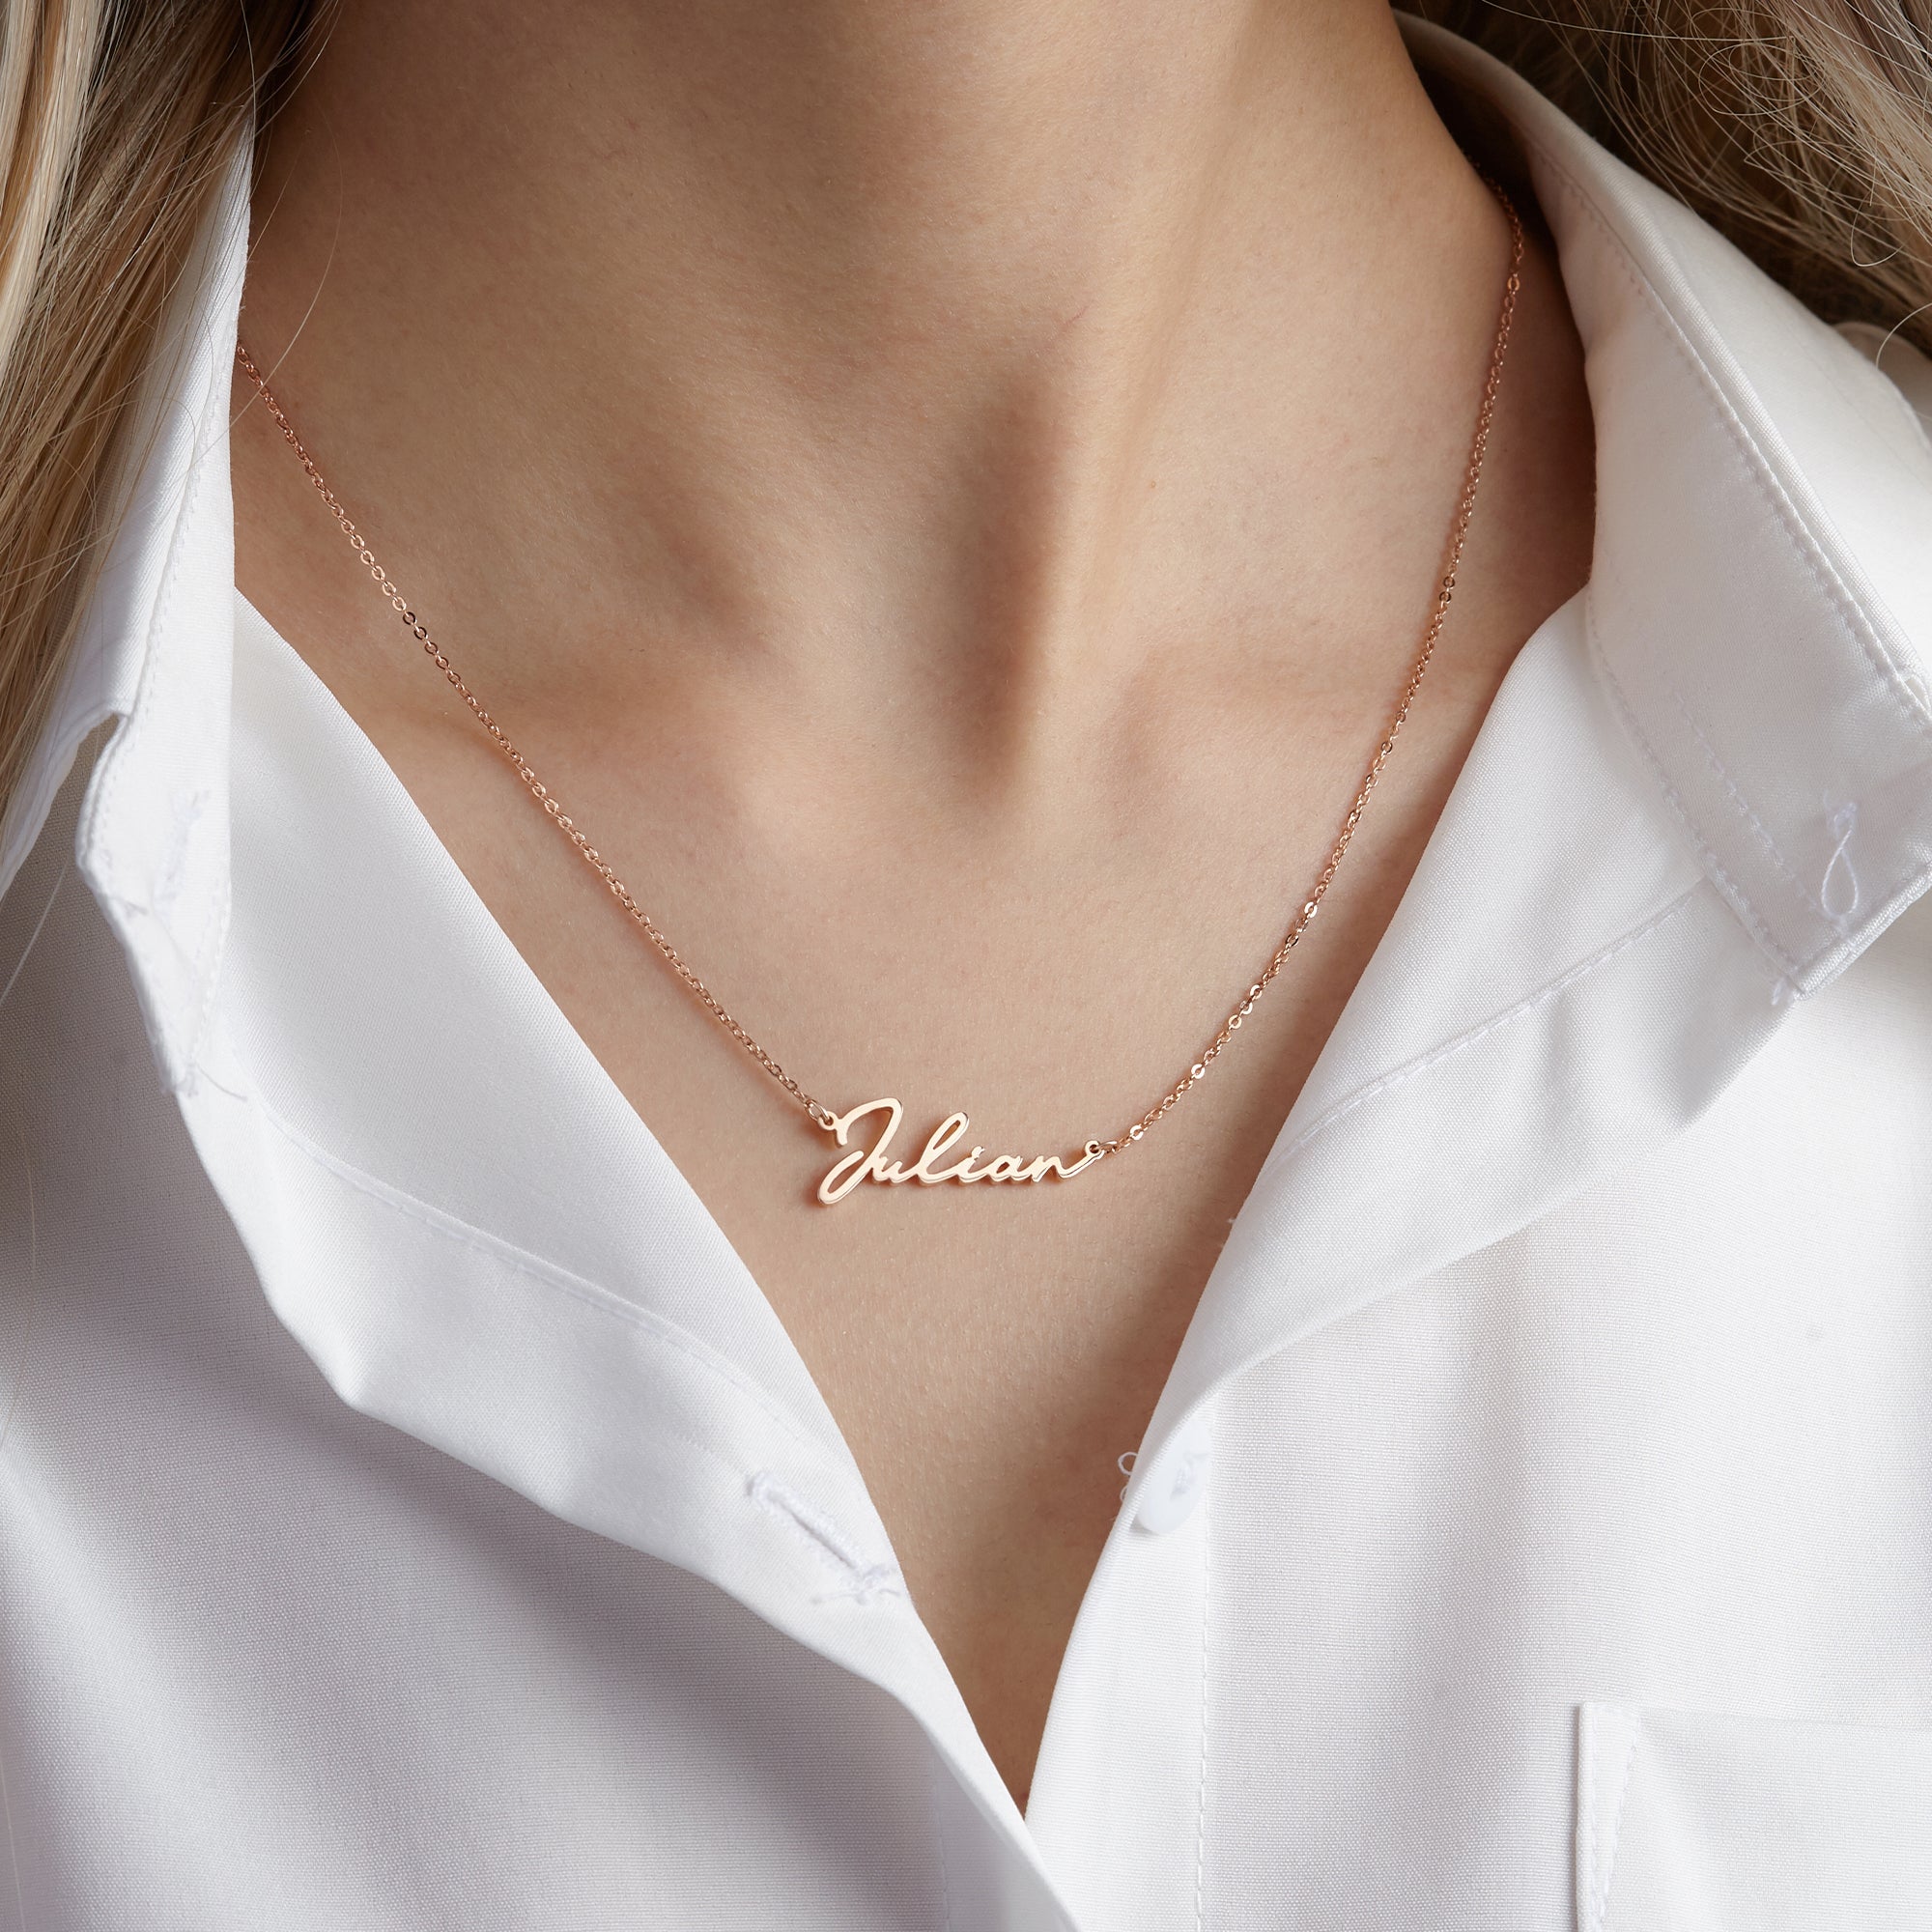 Personalized Name Necklace - Handwriting Font Jewelry for Teen Girls - Necklaces - Bijou Her -  -  - 